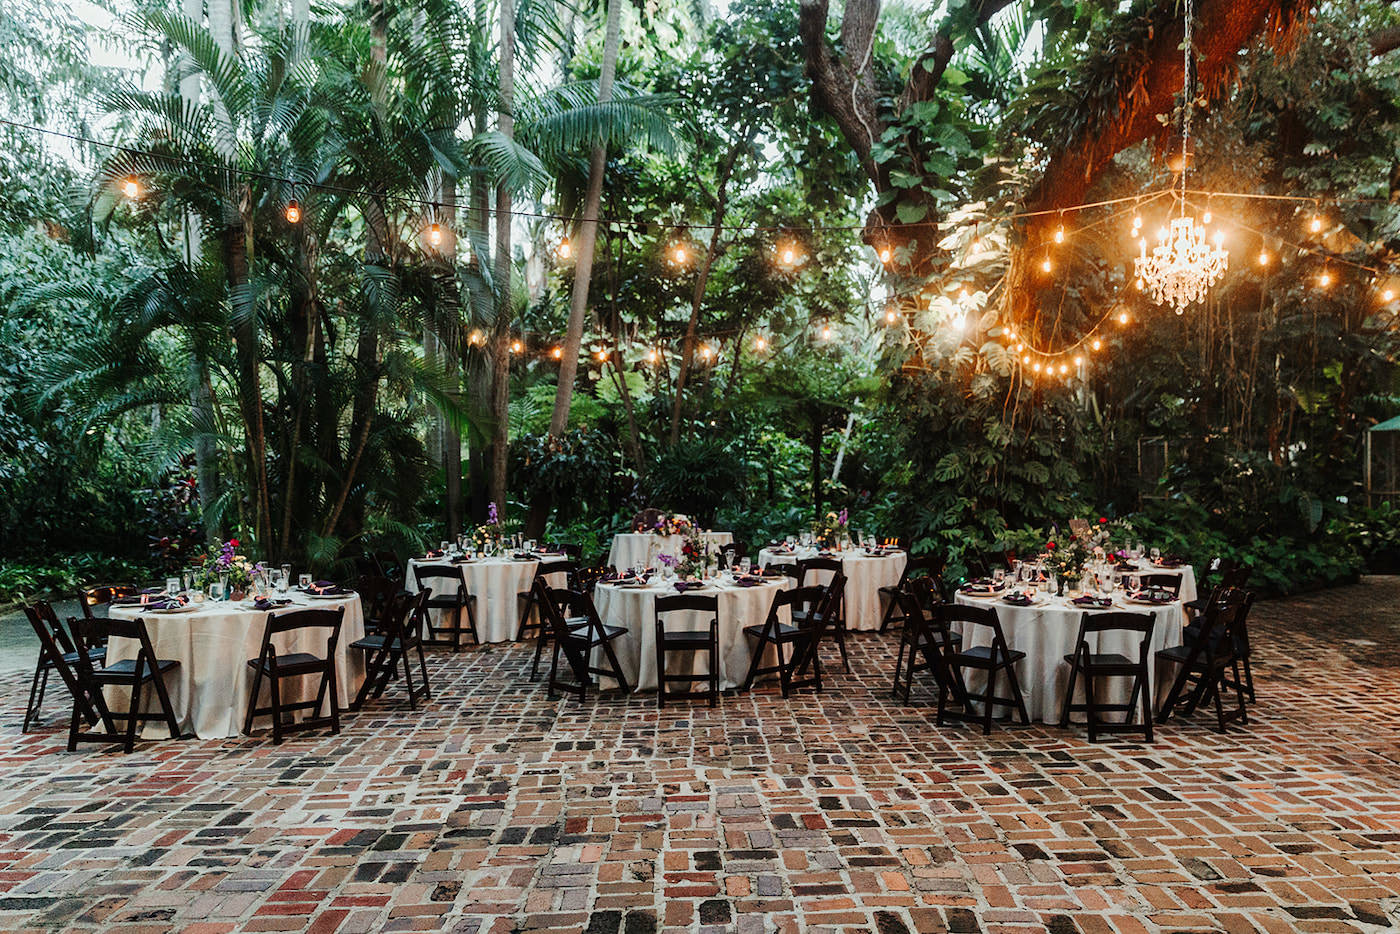 Whimsical Boho Outdoor Courtyard Garden Wedding Reception Decor, Round Tables with Wooden Folding Chairs, Cream Linens, Colorful Floral Centerpieces, Hanging Crystal Chandelier and String Lights | Tampa Bay Wedding Planner Kelly Kennedy Weddings and Events | St. Pete Wedding Venue Sunken Gardens